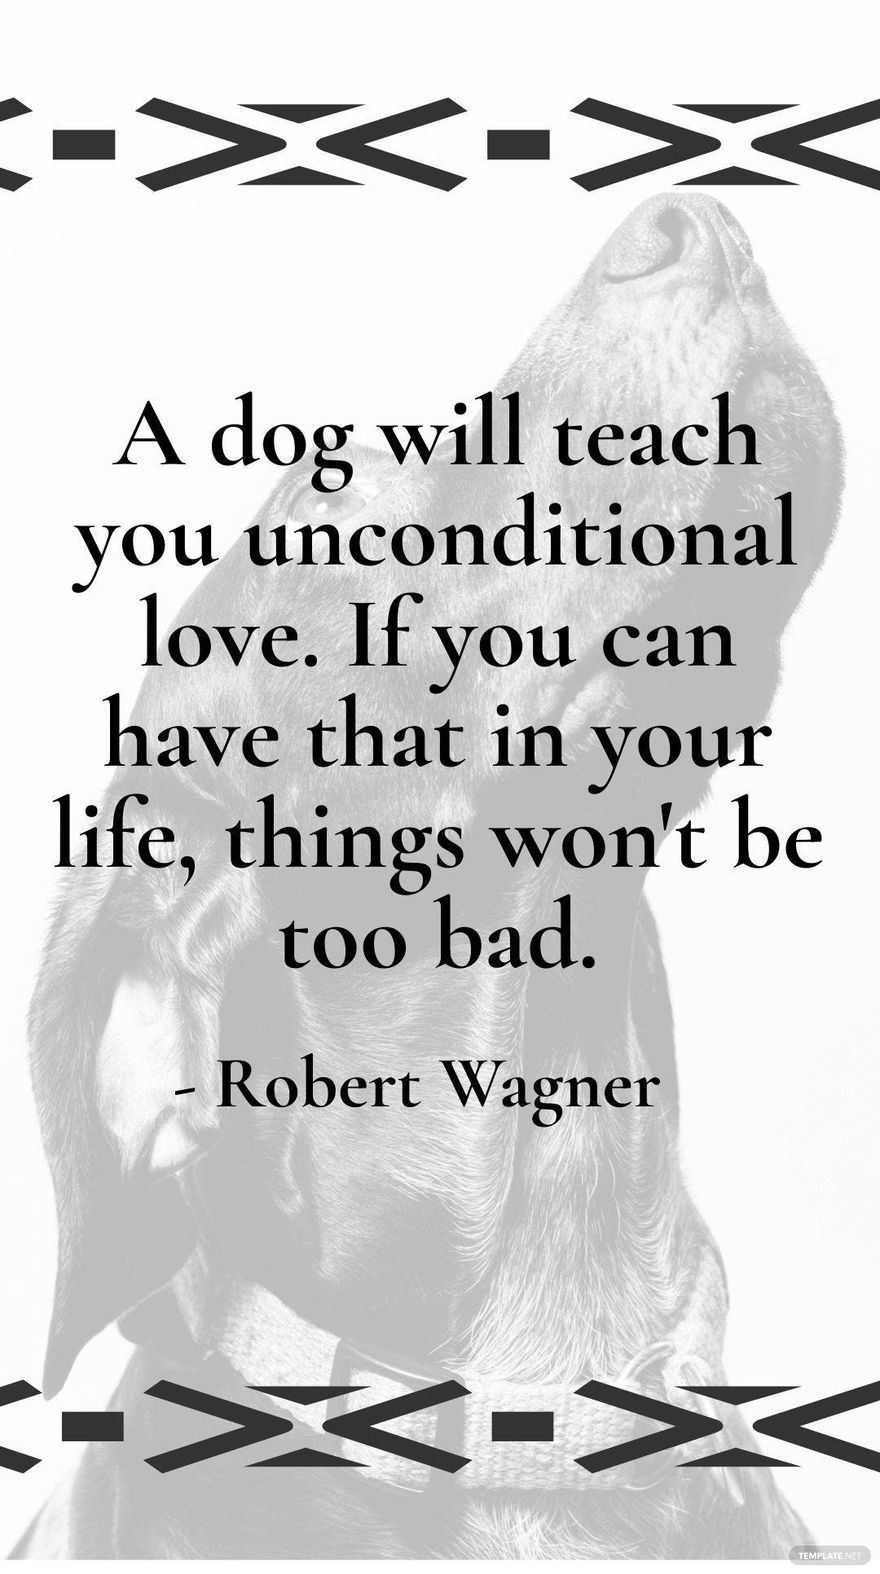 Robert Wagner - A dog will teach you unconditional love. If you can have that in your life, things won't be too bad.